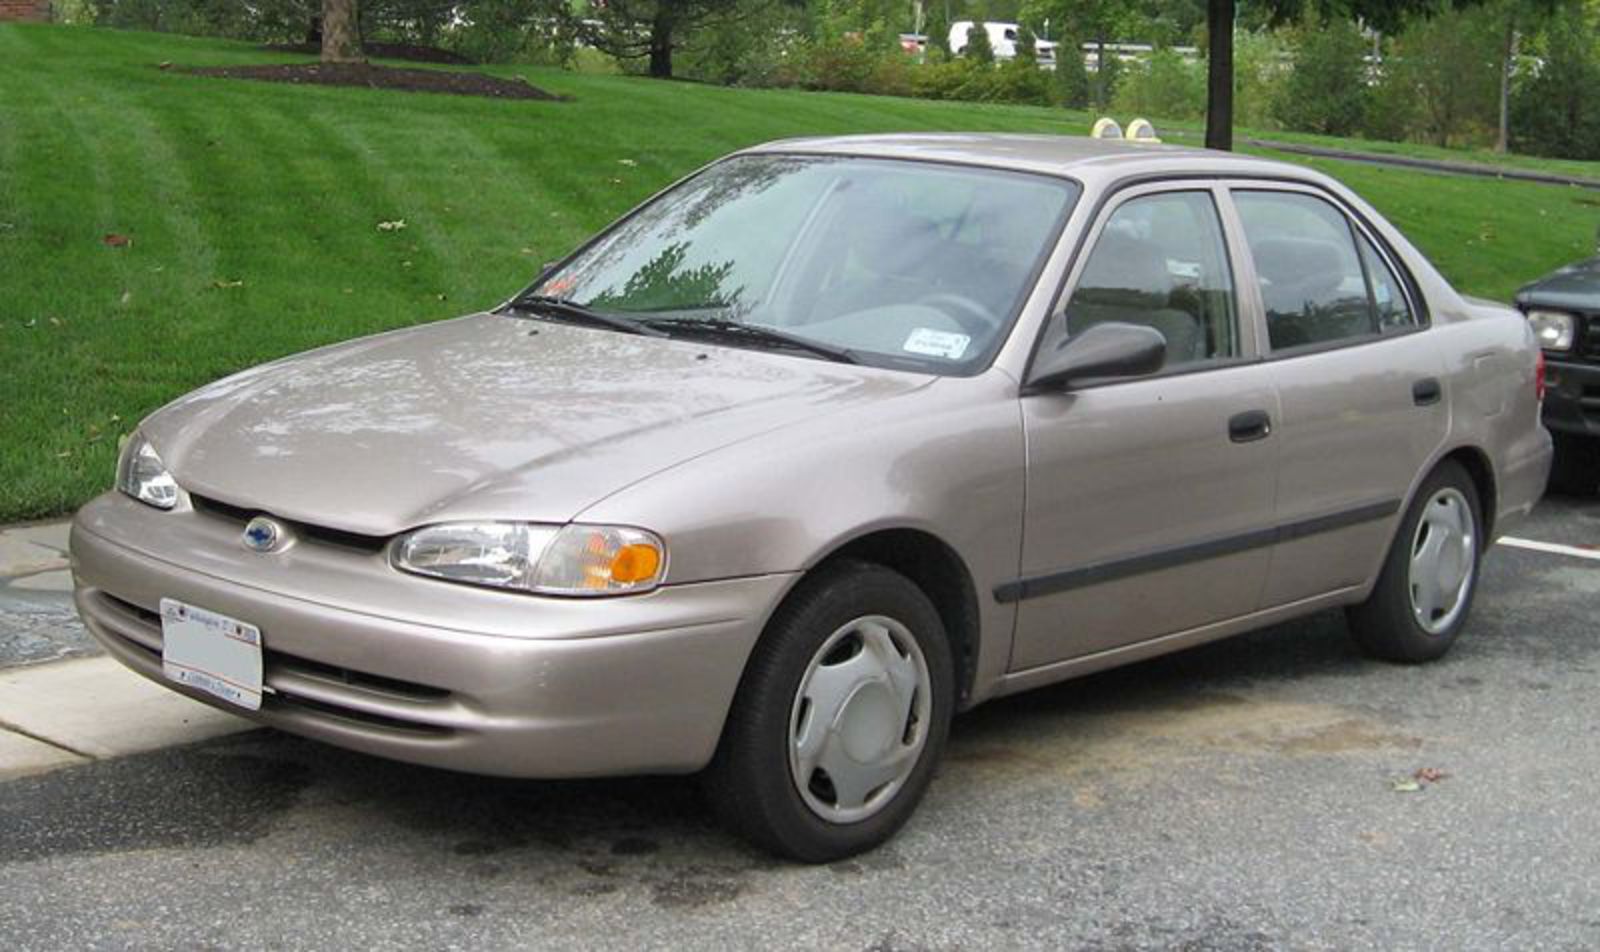 Looking for 1998 Geo Prizm pictures?